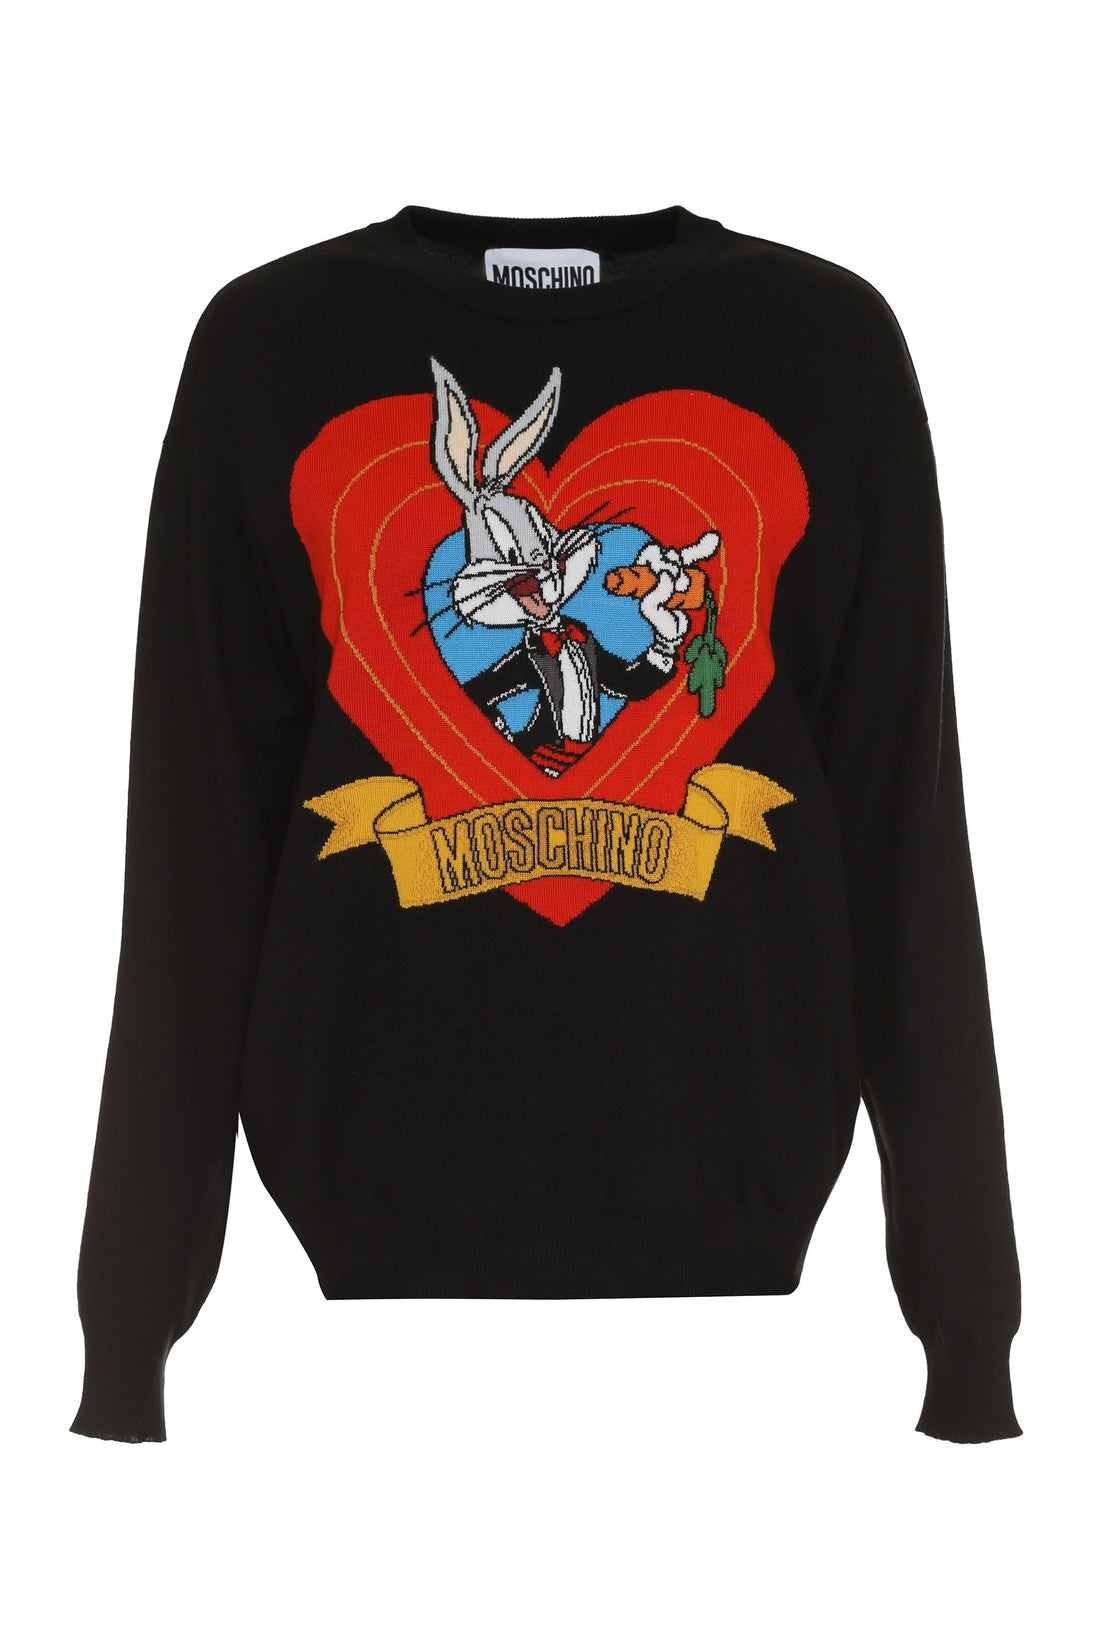 Moschino-OUTLET-SALE-Intarsia wool sweater-ARCHIVIST